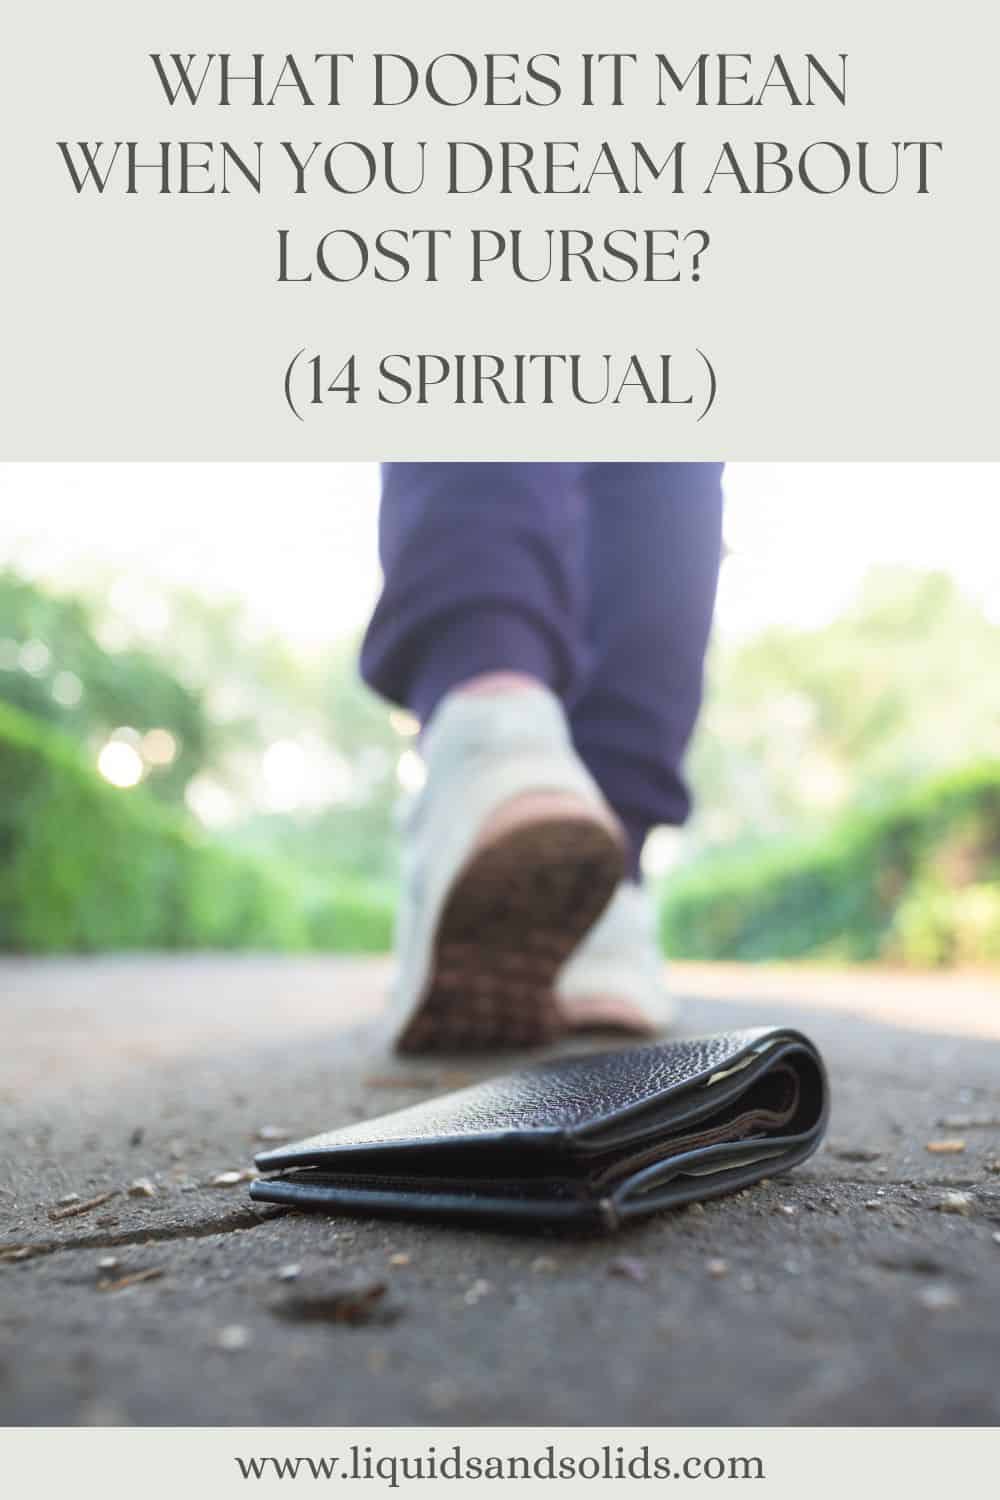 What Does It Mean When You Dream About Lost Purse? (14 Spiritual)